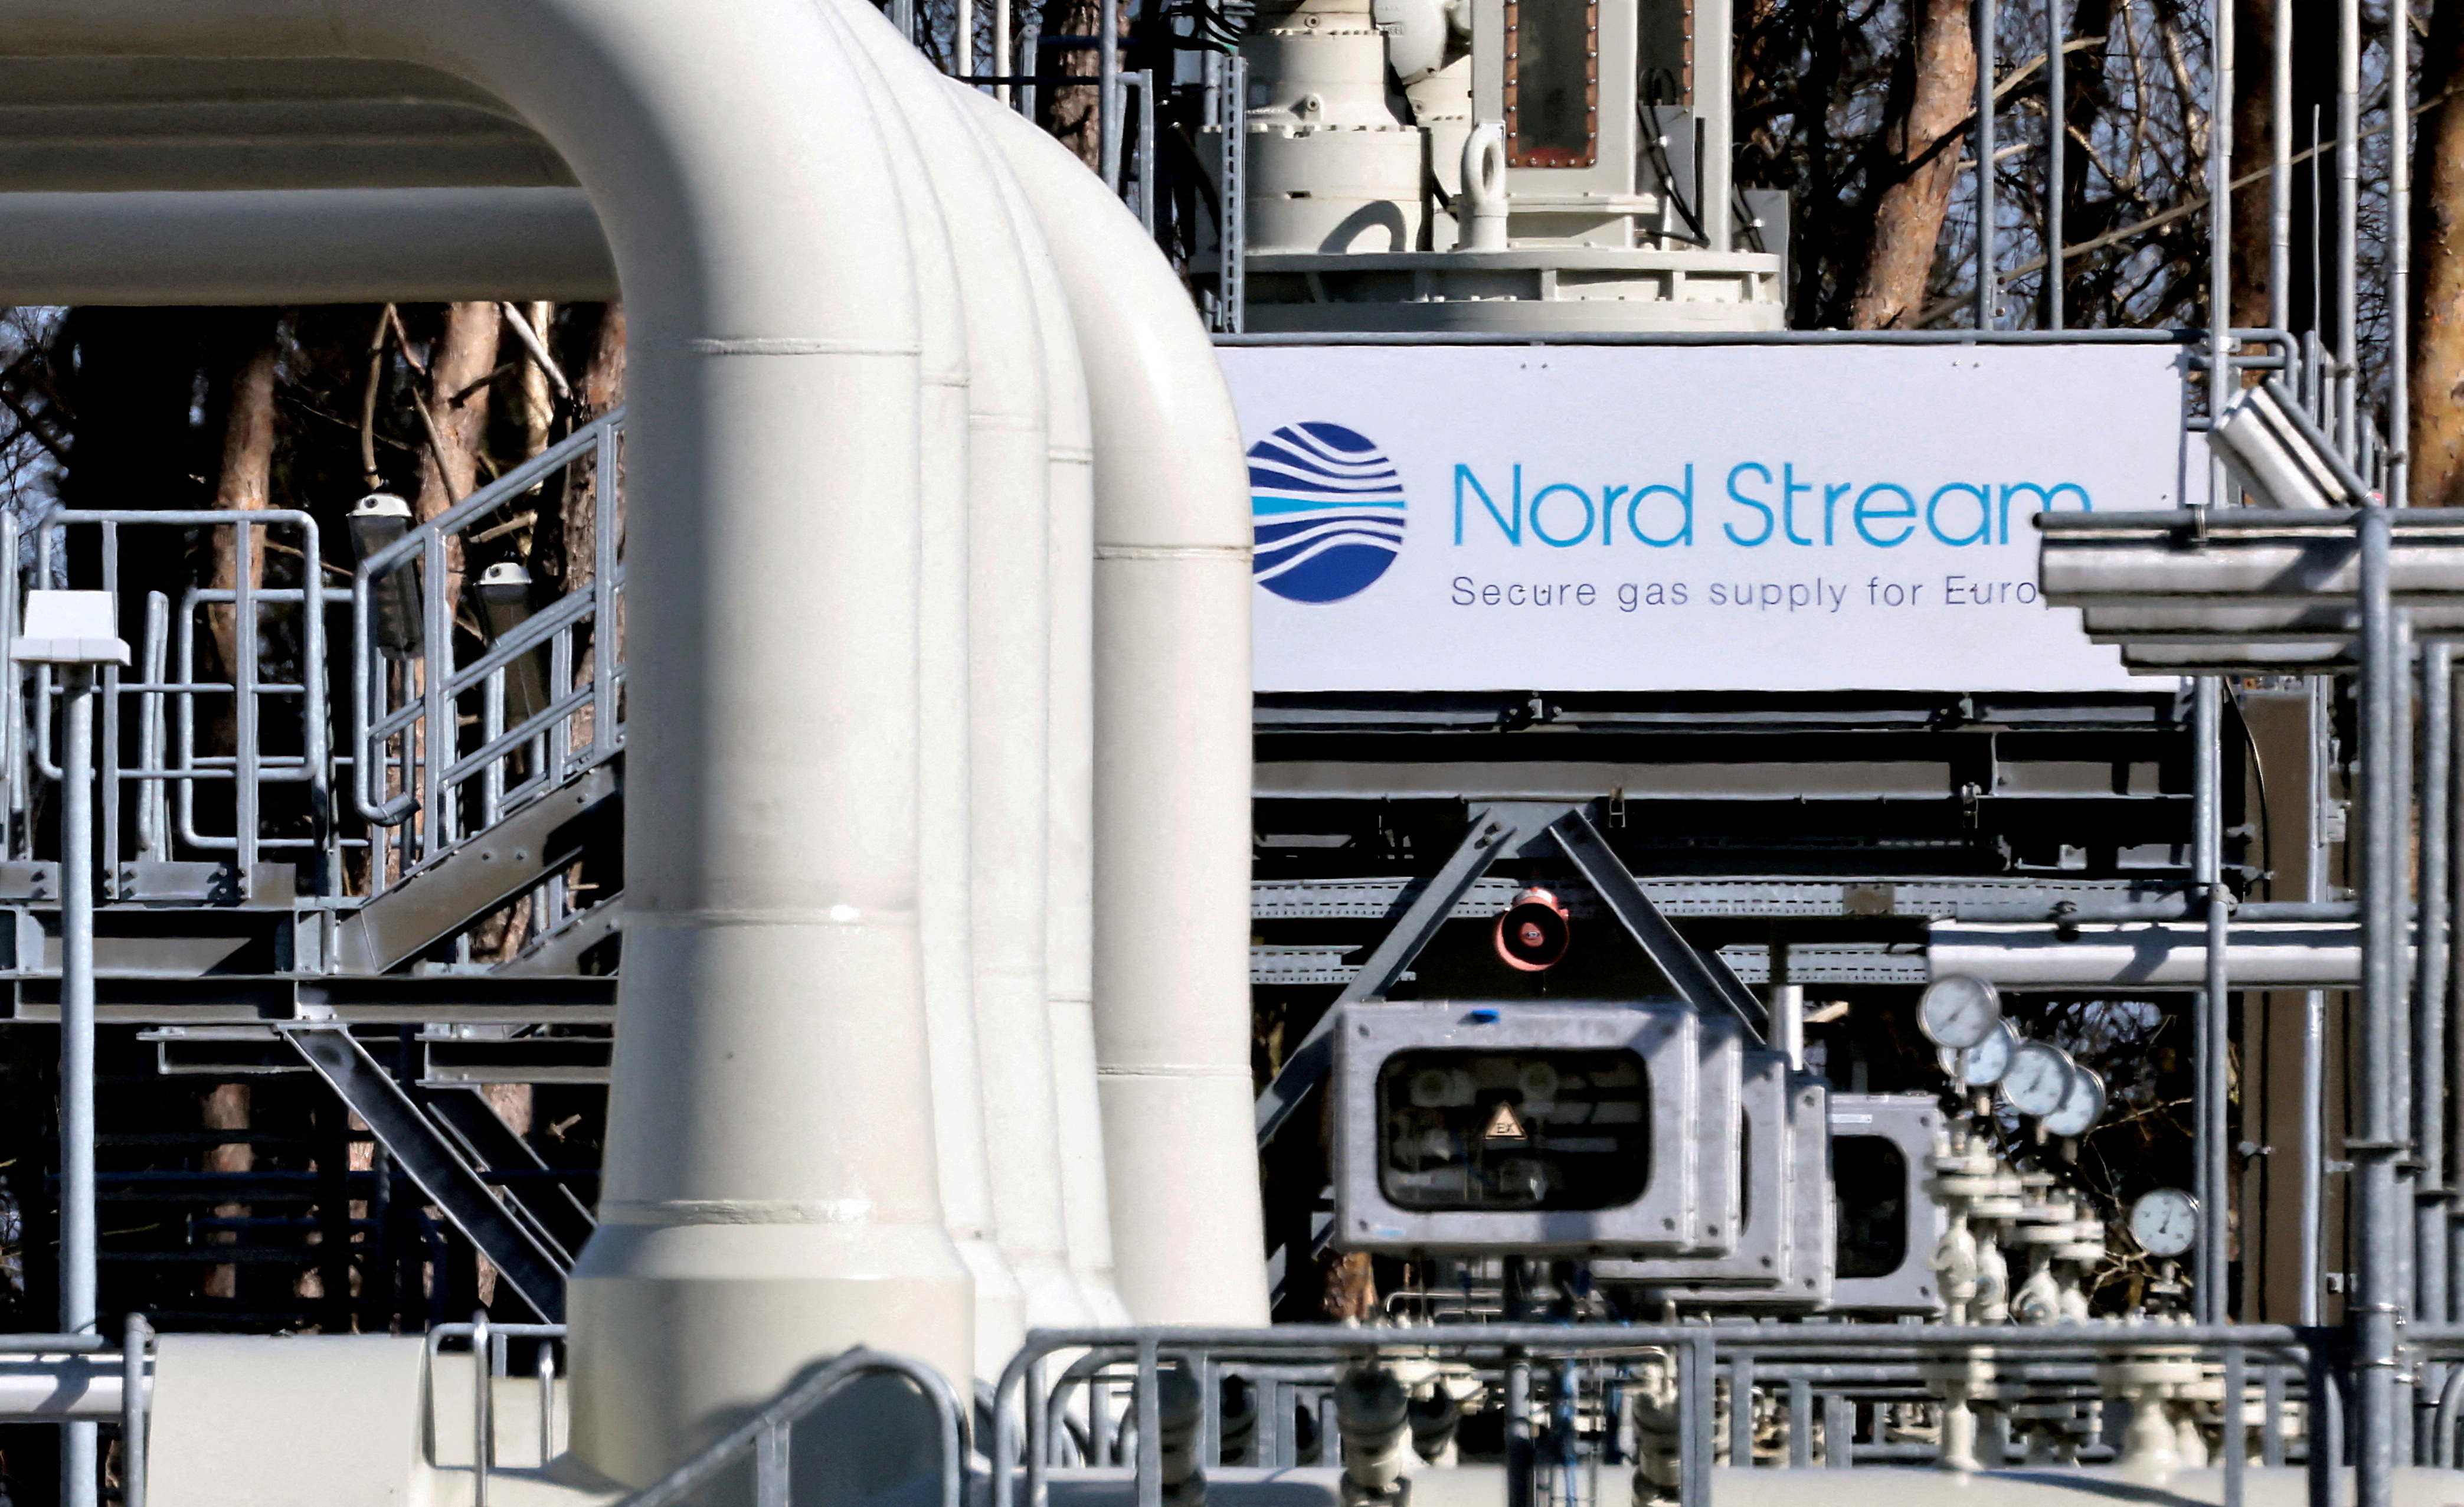 Pipes at the landfall facilities of the 'Nord Stream 1' gas pipeline in Lubmin, Germany